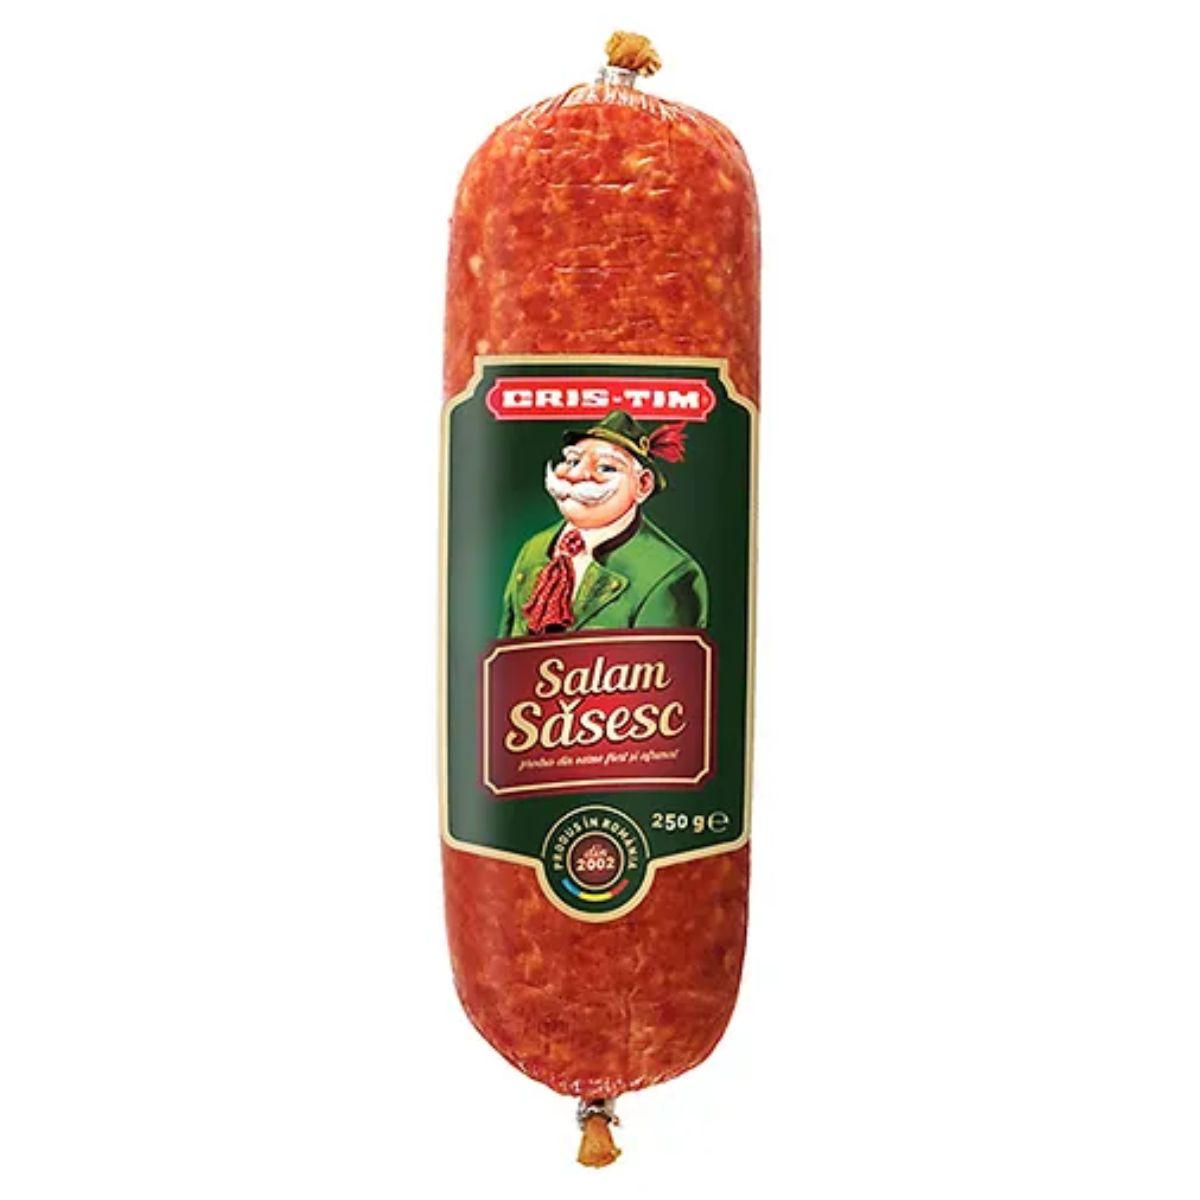 A CrisTim - Sasesc Salami - 250g with a picture of a man on it.